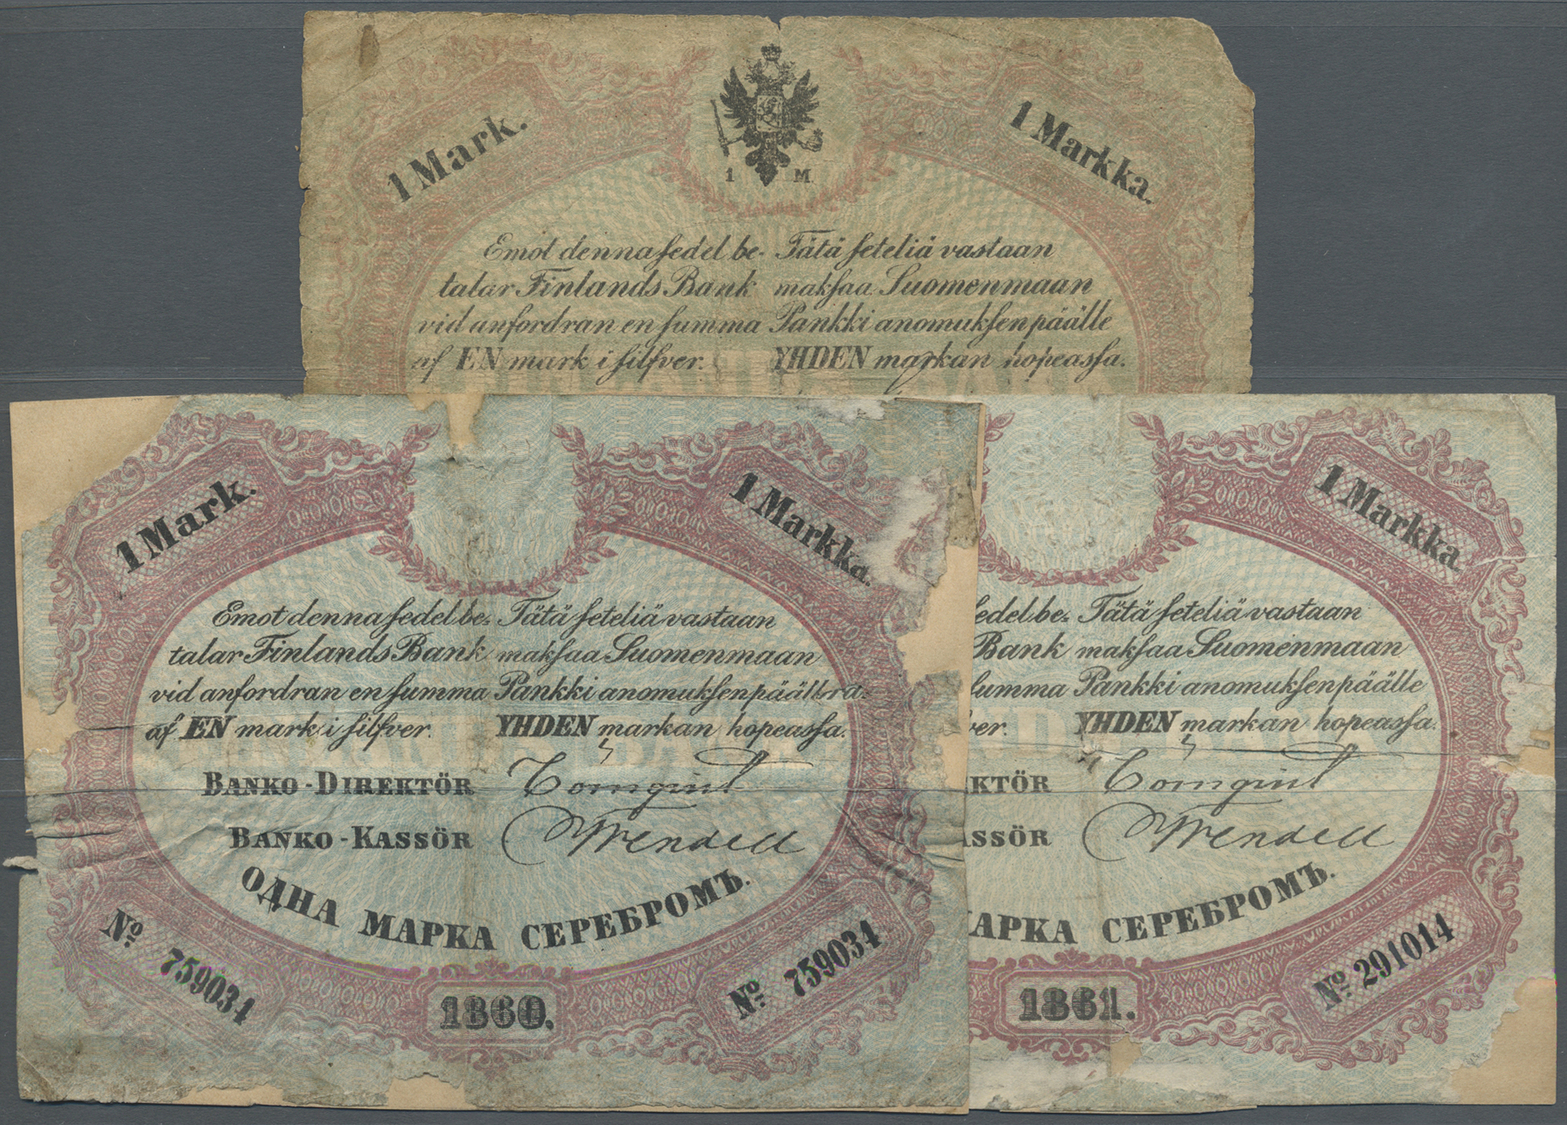 00791 Finland / Finnland: Set With 3 Banknotes 1 Silver Mark 1860, 1861 (P.A32A), Both Restored And Glued On Paper And 1 - Finland